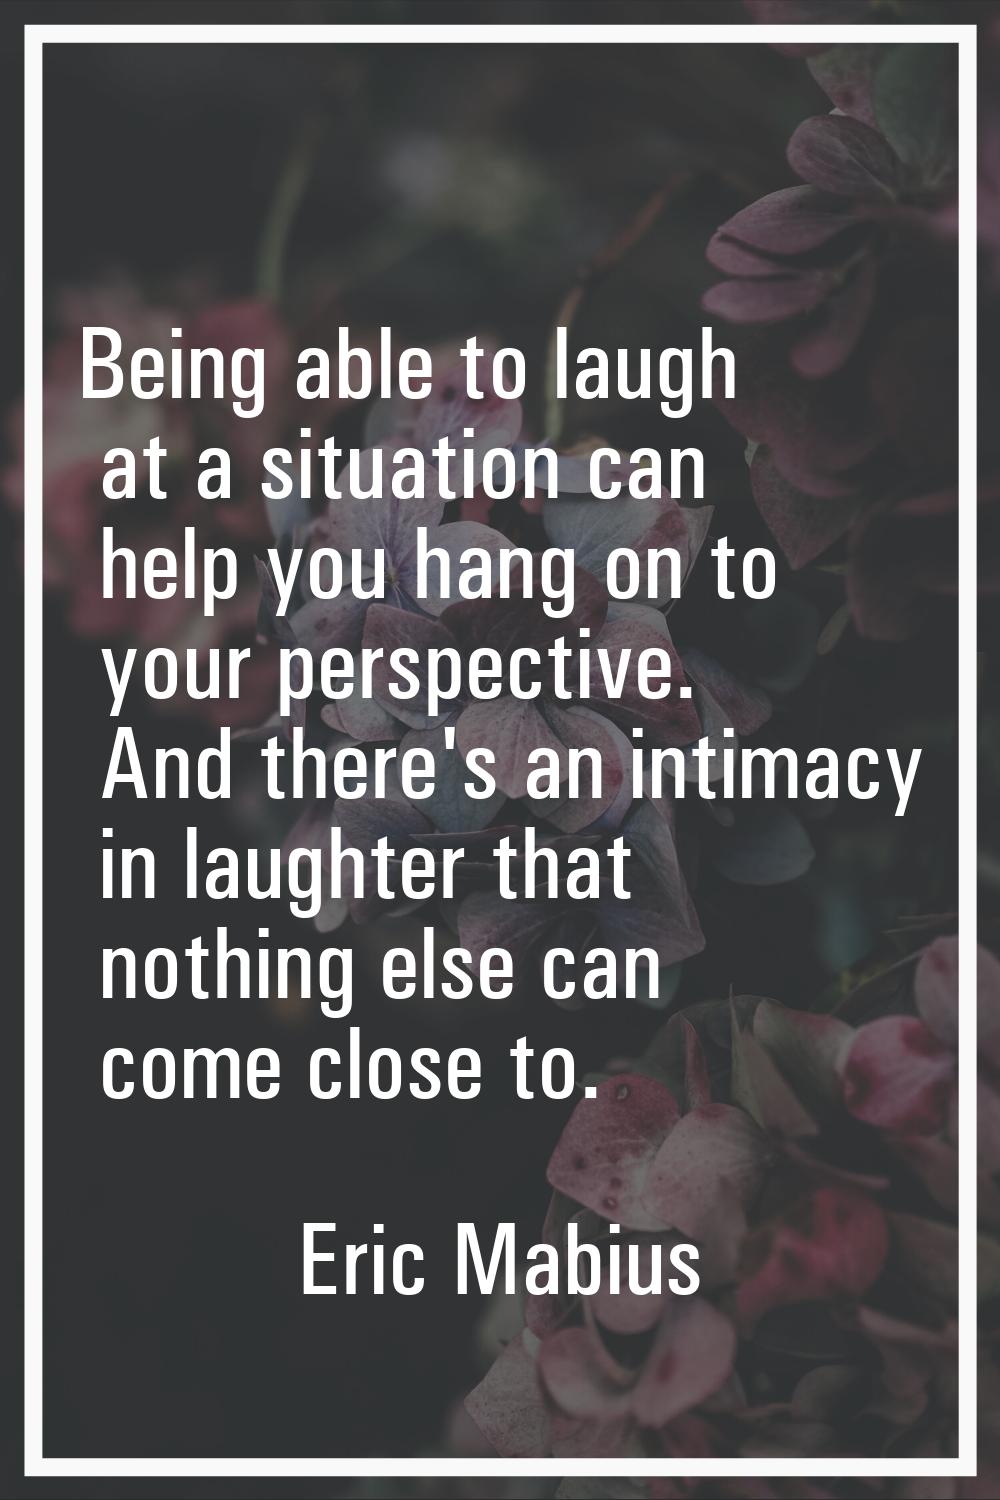 Being able to laugh at a situation can help you hang on to your perspective. And there's an intimac